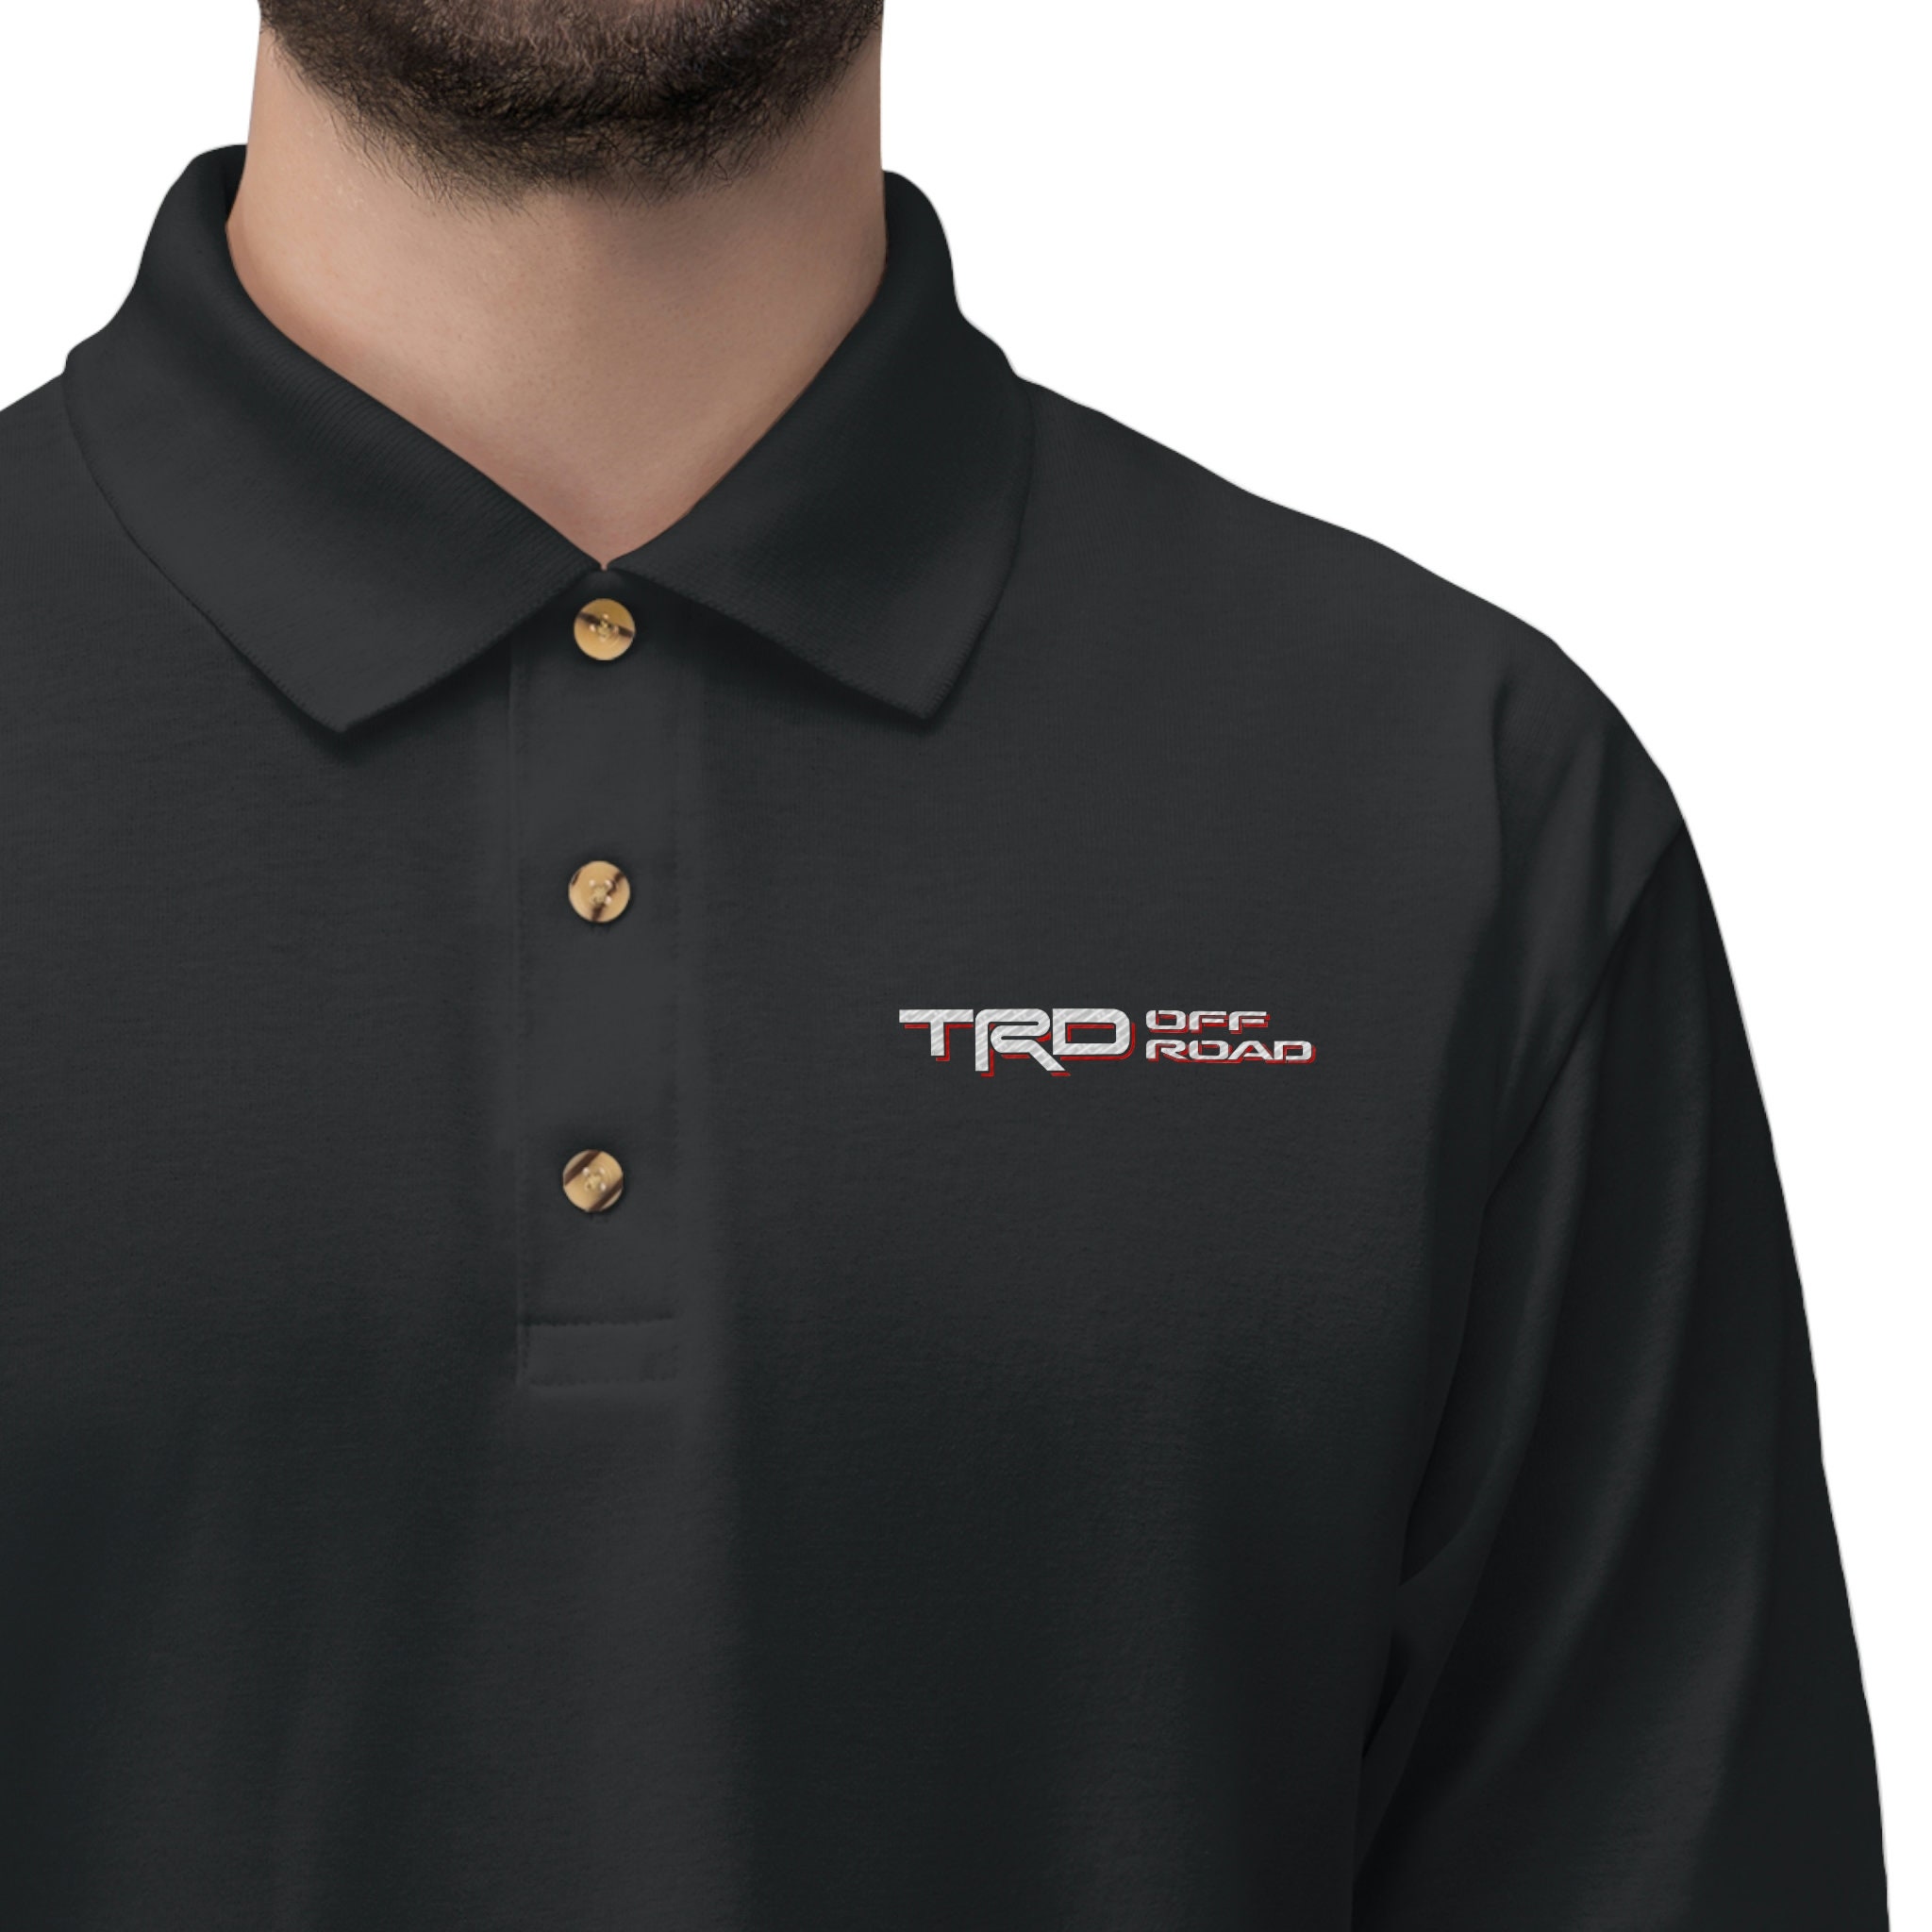 TRD Off Road Embroidered Mens Polo Shirt